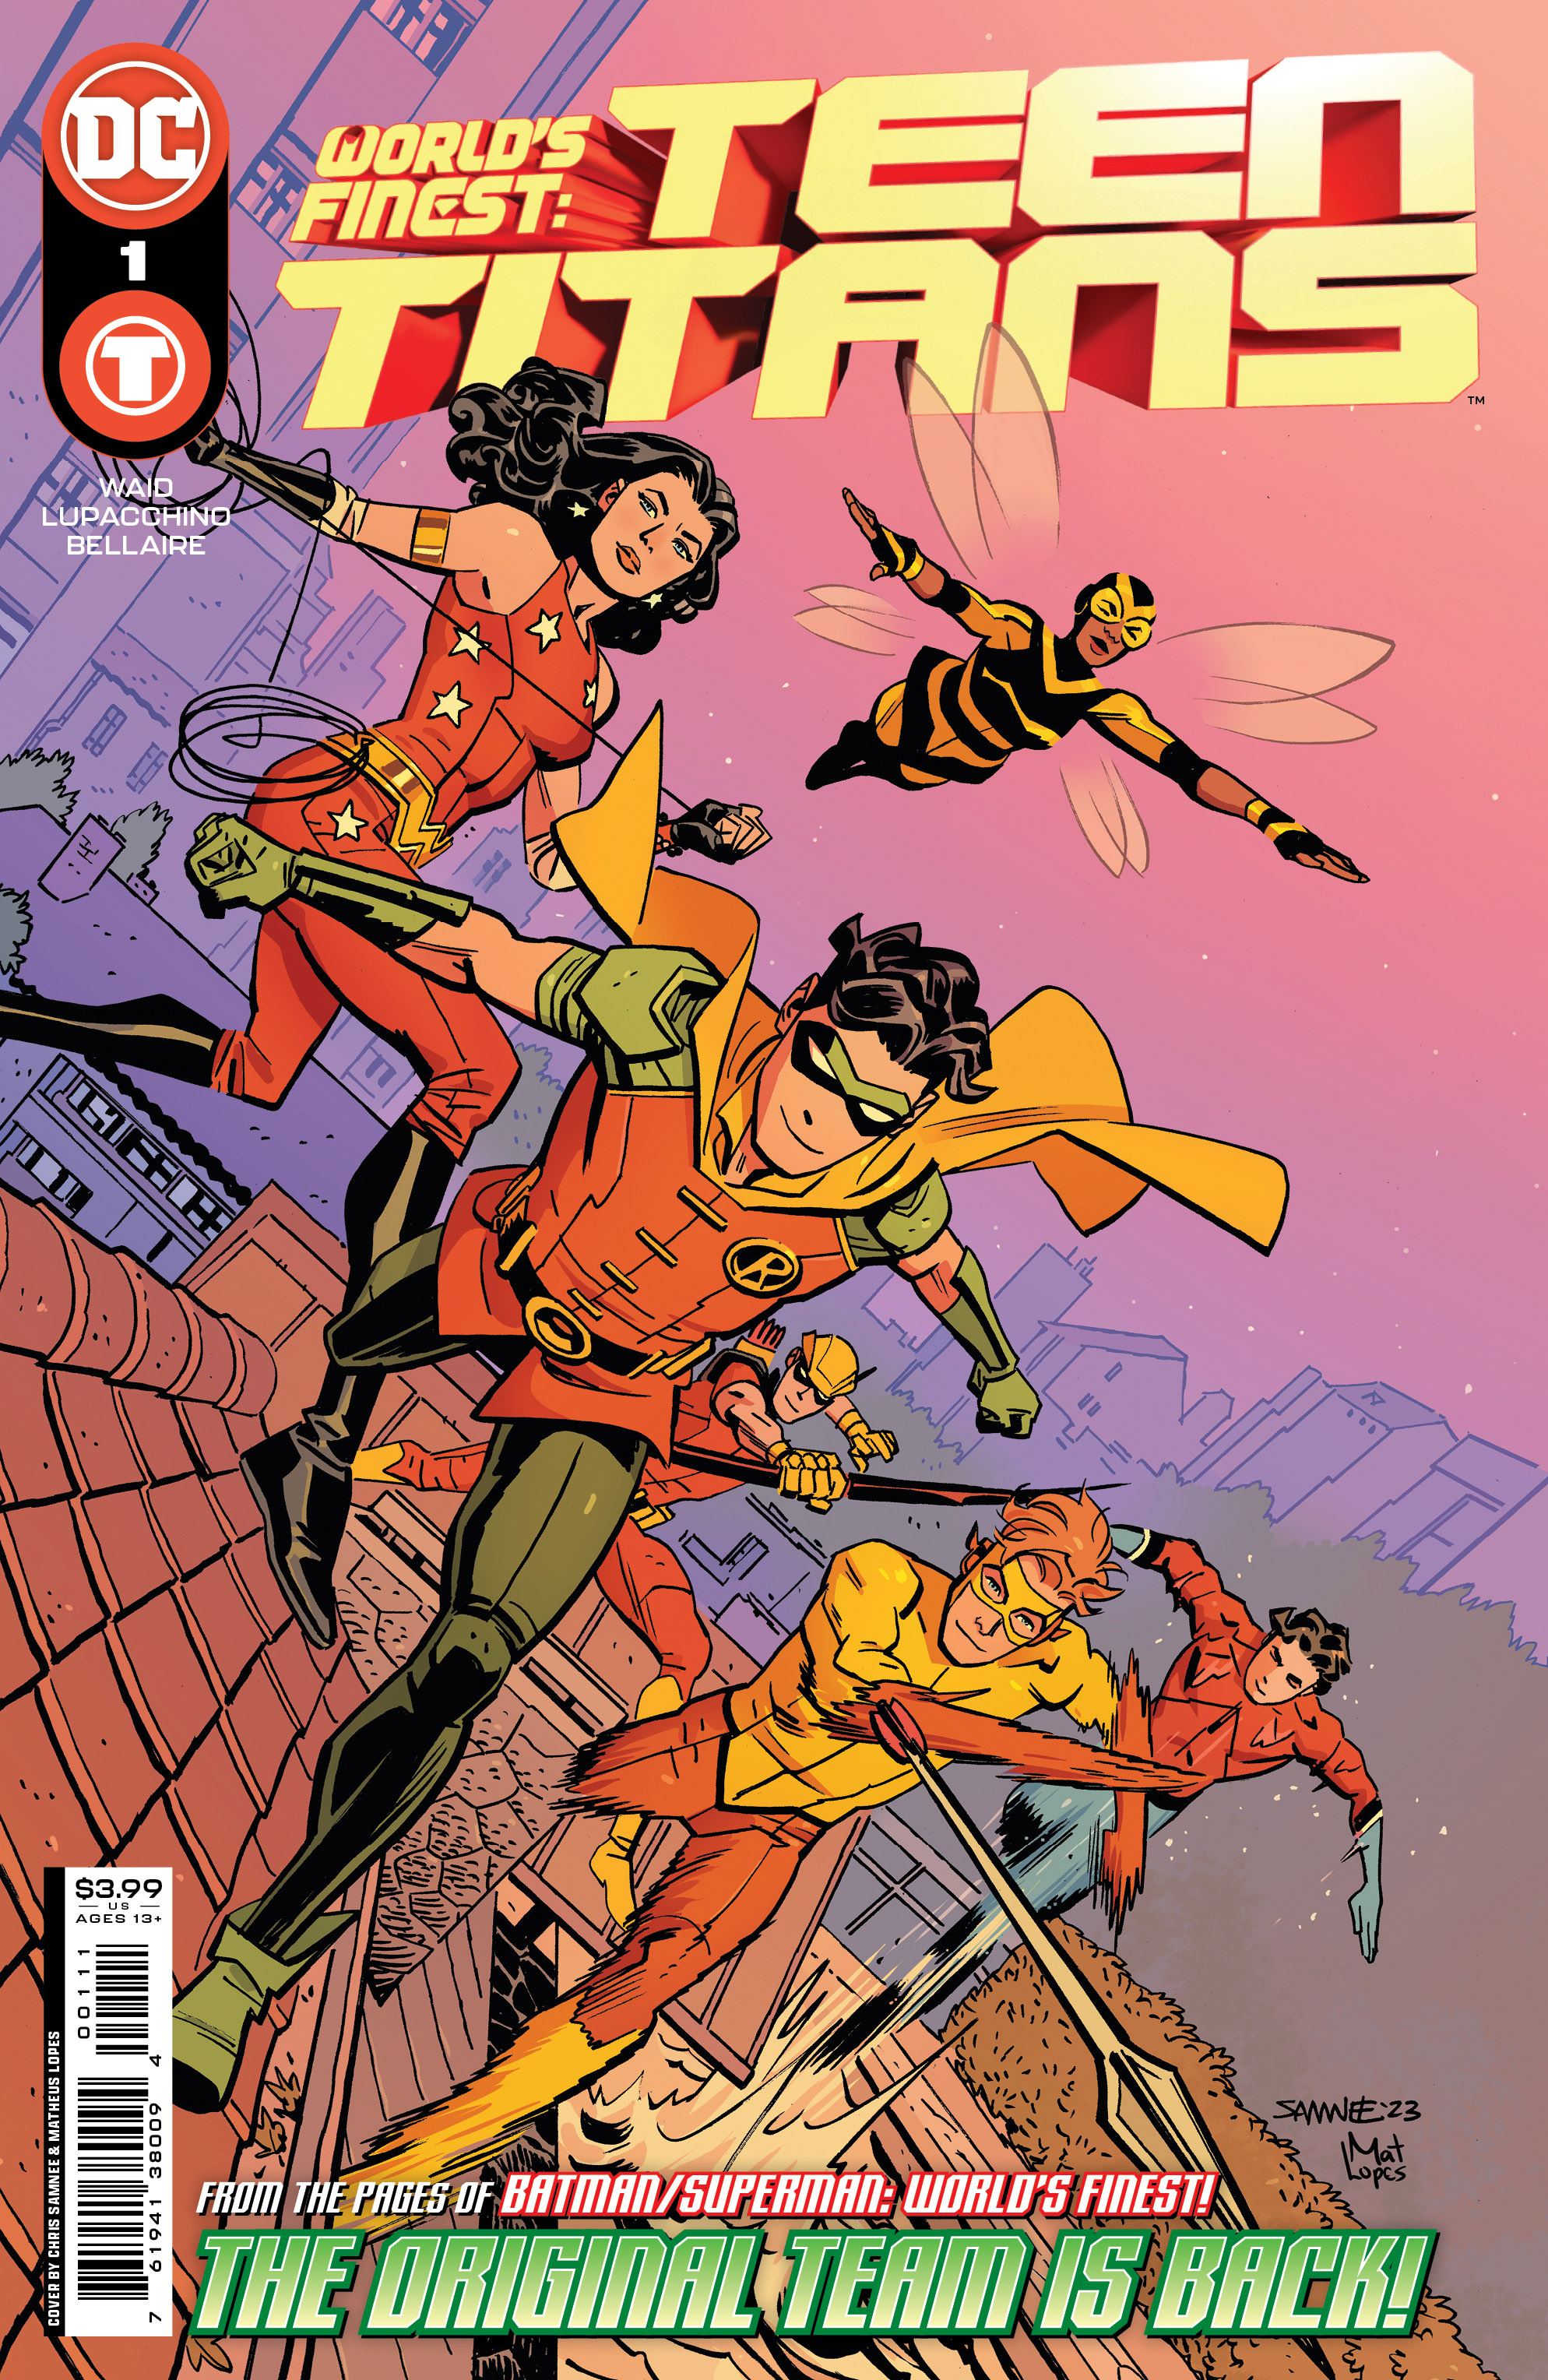 Worlds Finest Teen Titans #1 Cover A Chris Samnee (Of 6)